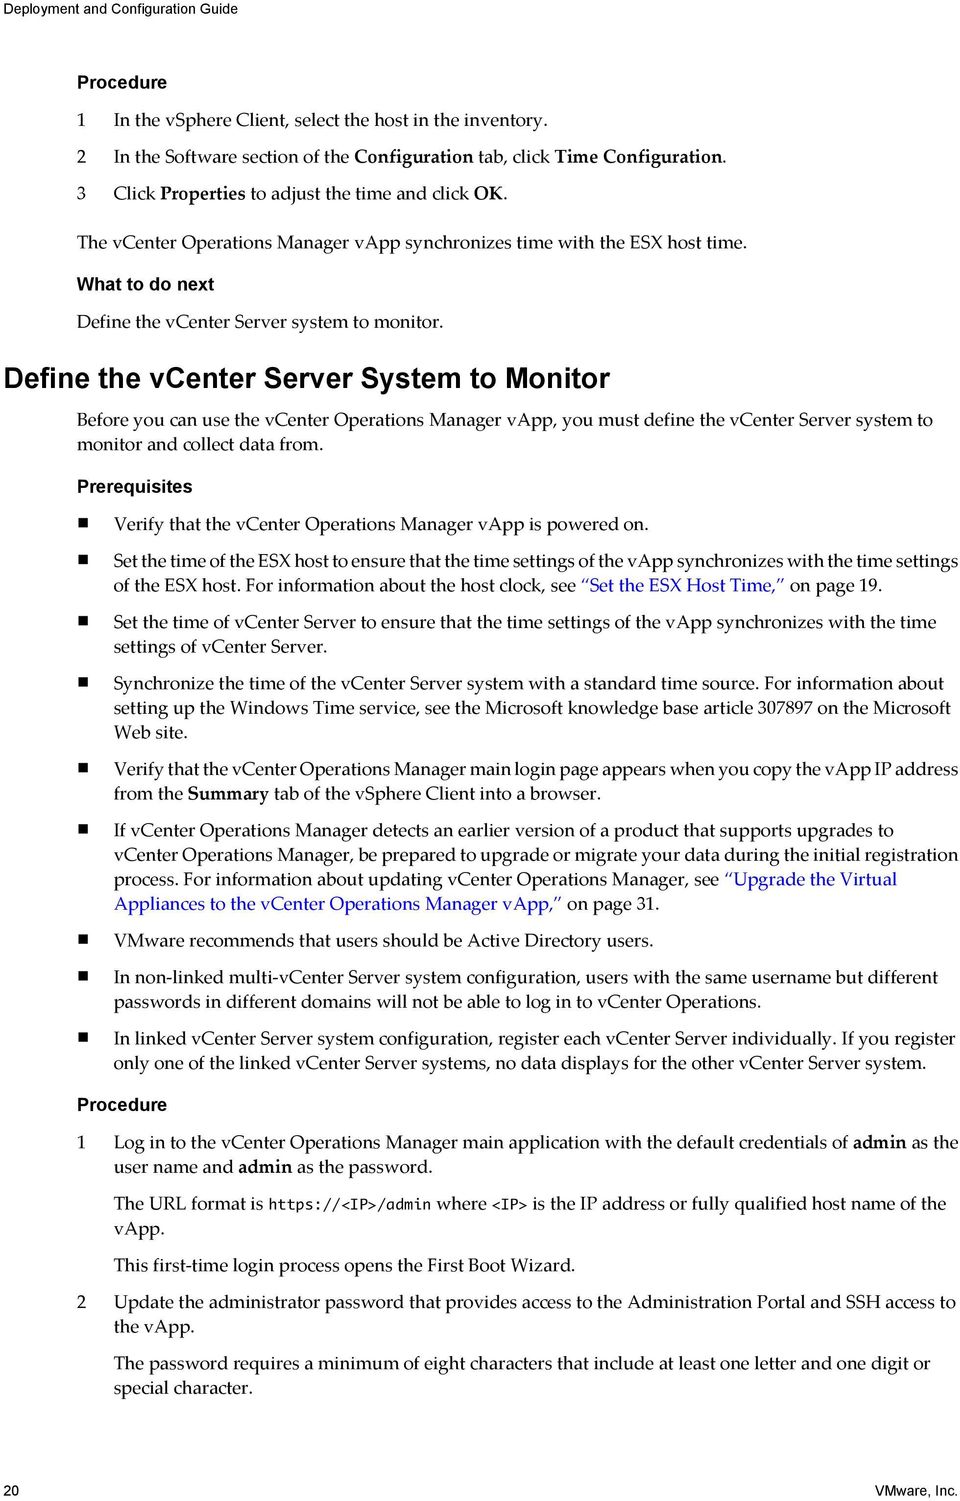 Define the vcenter Server System to Monitor Before you can use the vcenter Operations Manager vapp, you must define the vcenter Server system to monitor and collect data from.